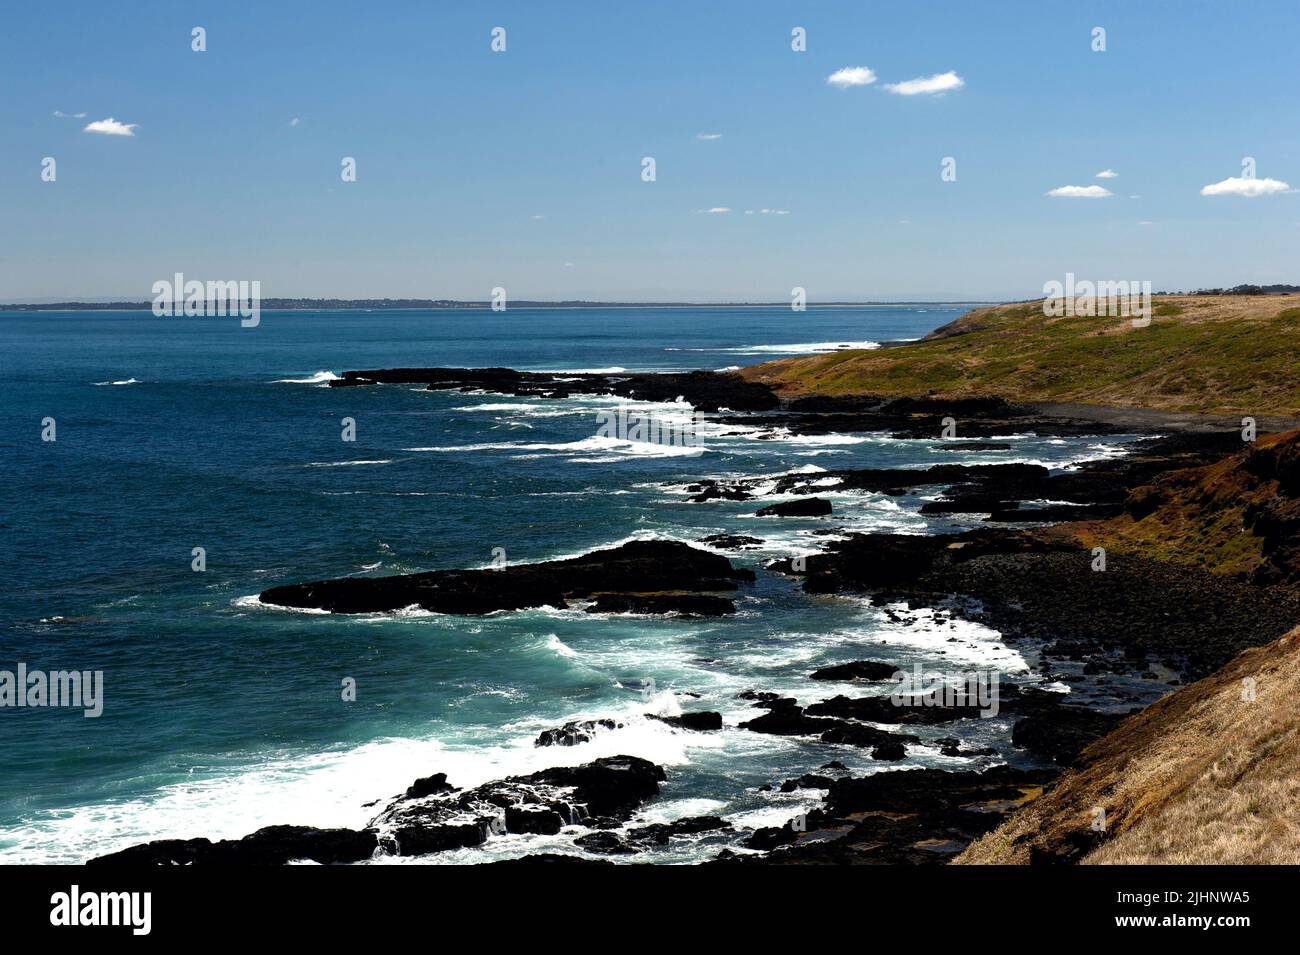 The rocky coast of Phillip Island in Victoria, Australia, looking out across Westernport Bay.The island does have some popular, sandy beaches. Stock Photo